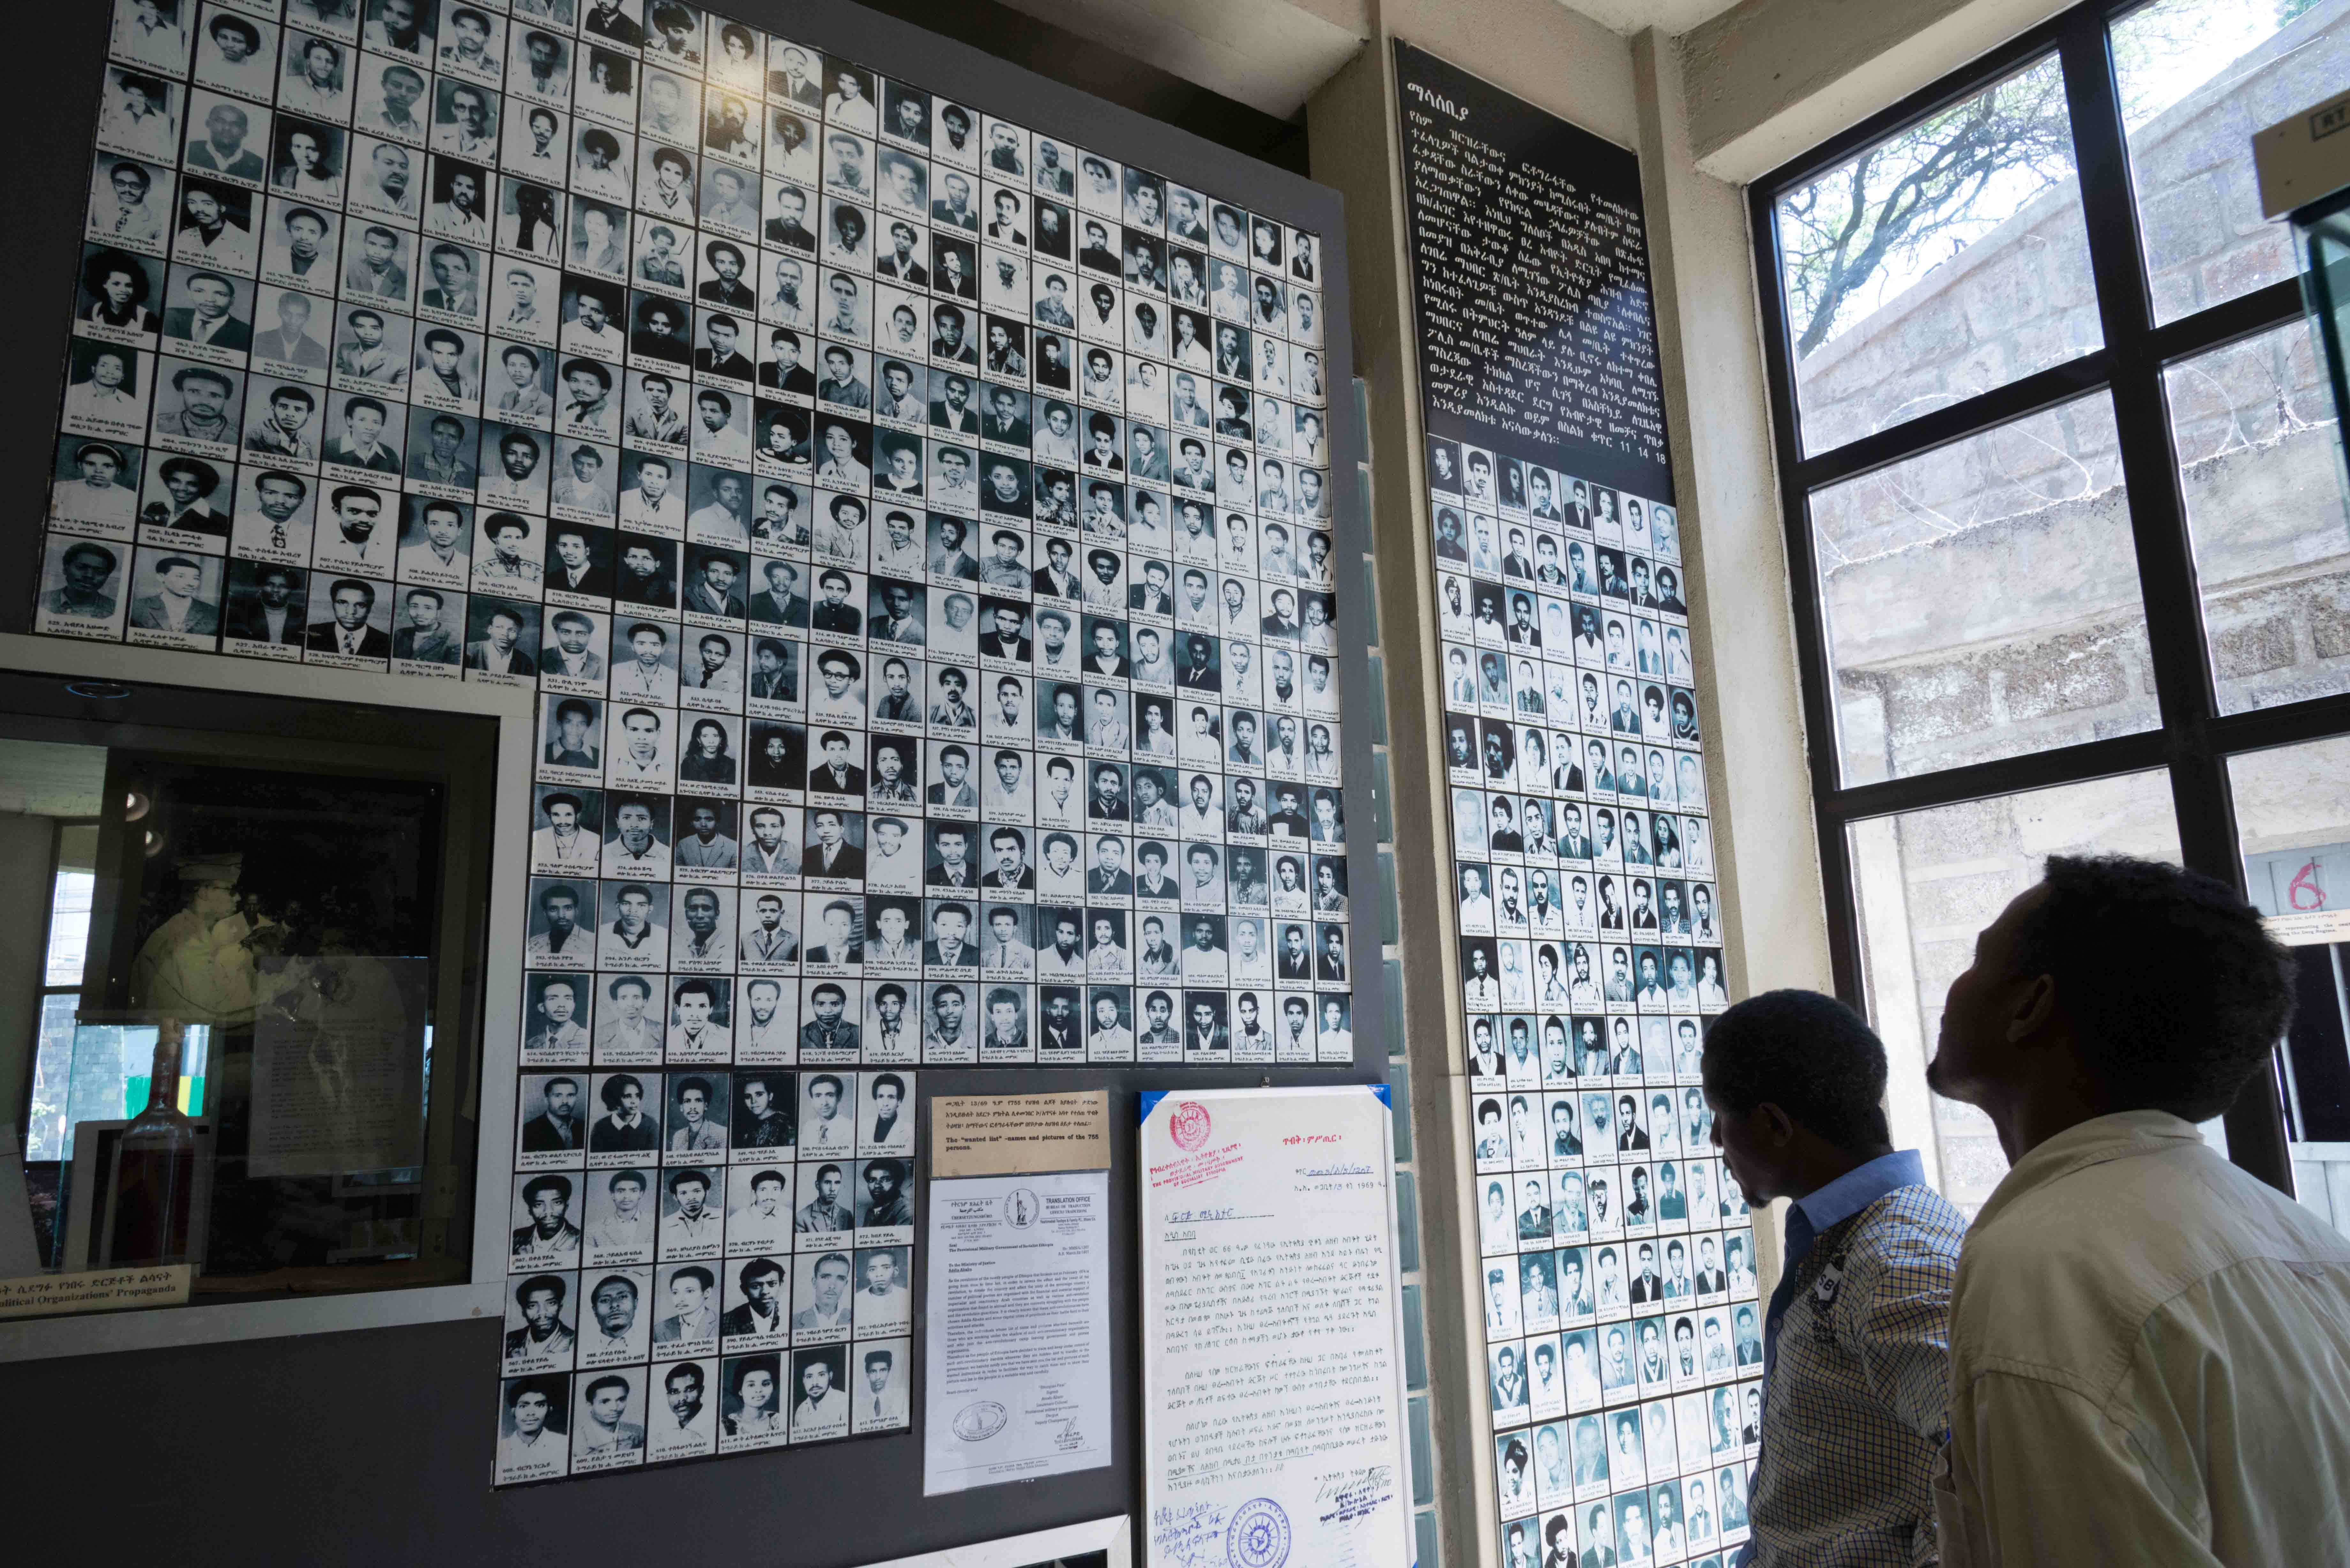 Visitors view photos of victims of the Derg regime in Ethiopia's Red Terror Martyrs' Memorial Museum in Addis Ababa on March 4, 2014. © 2014 Eitan Simanor/Alamy Stock Photo.  